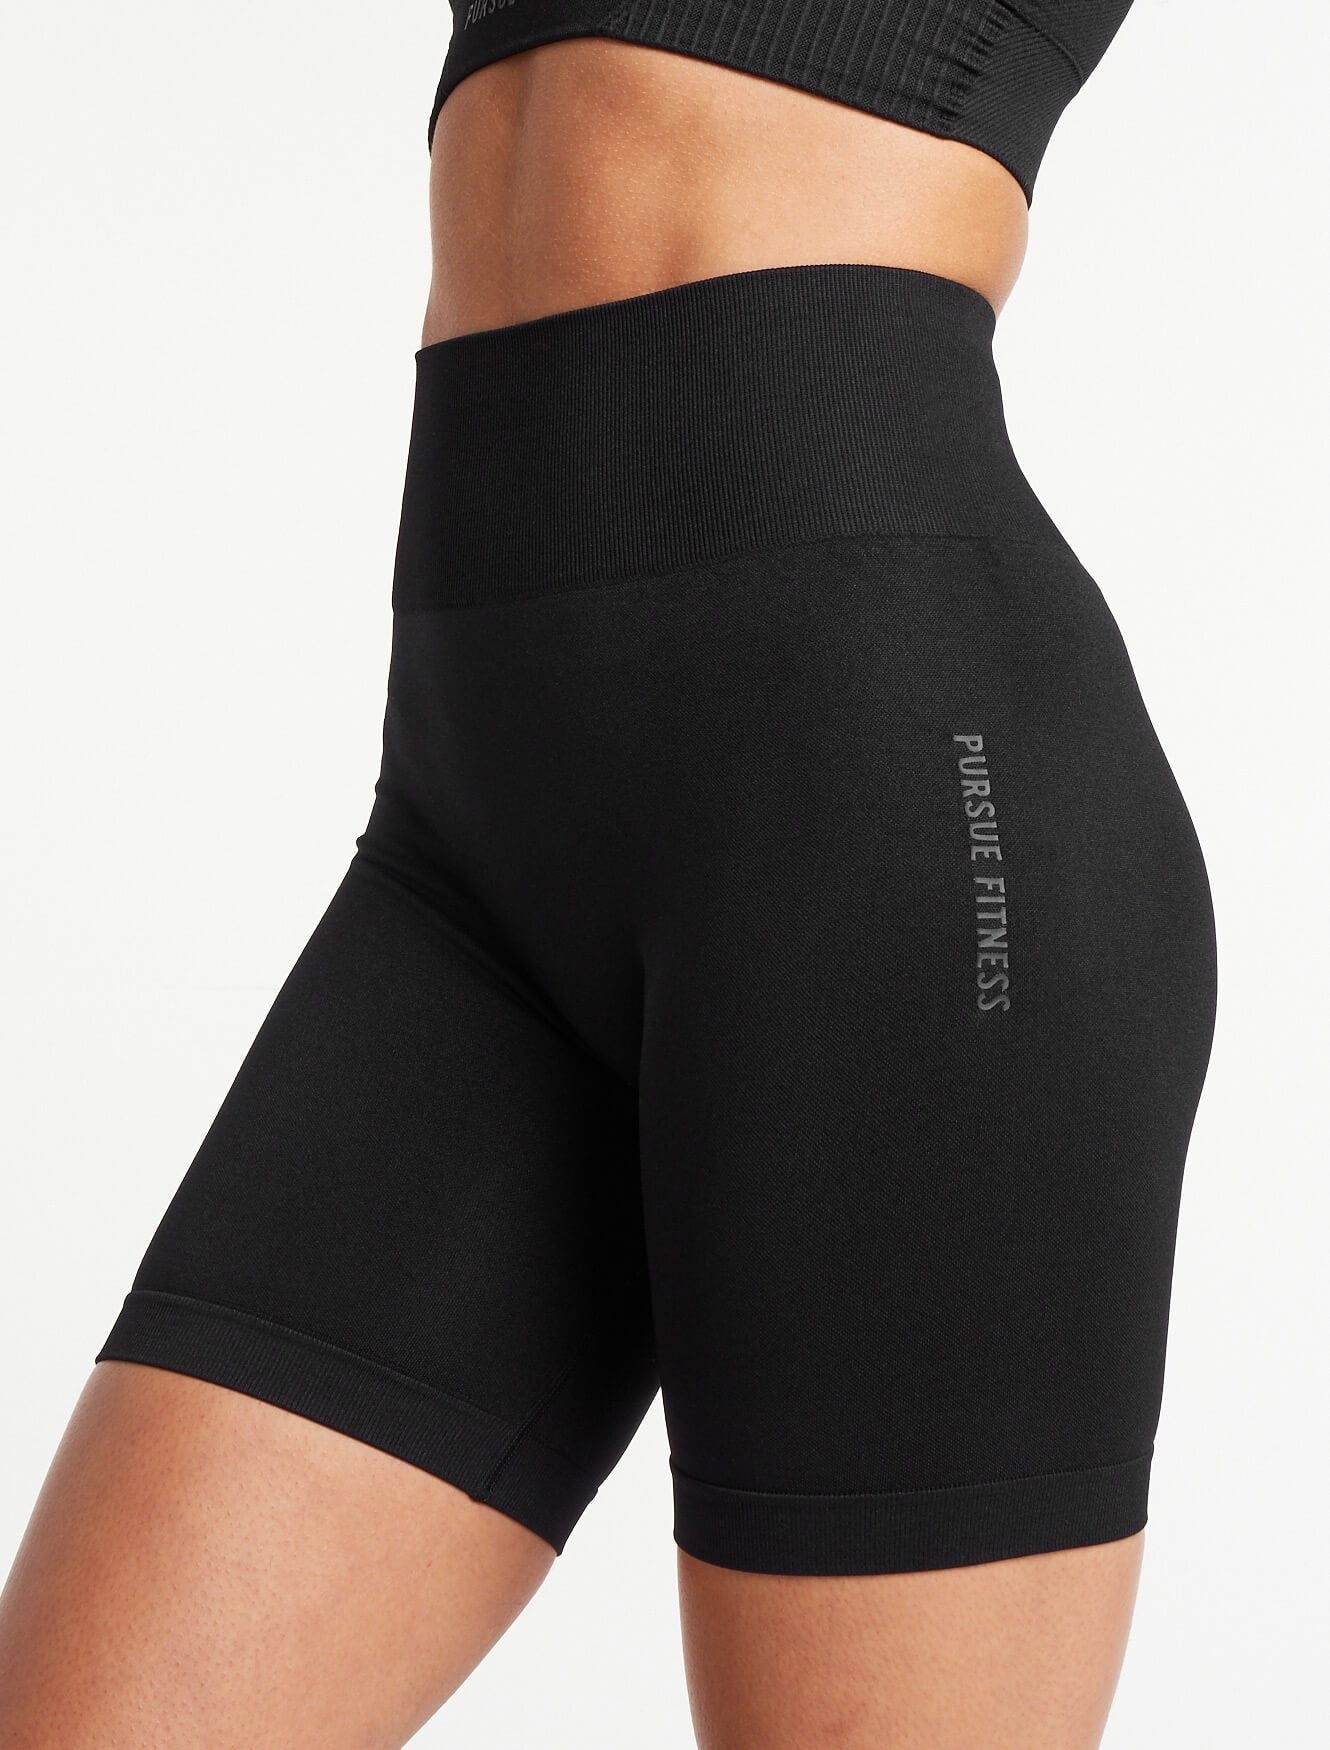 Afterglow Seamless Shorts / Blackout Pursue Fitness 8